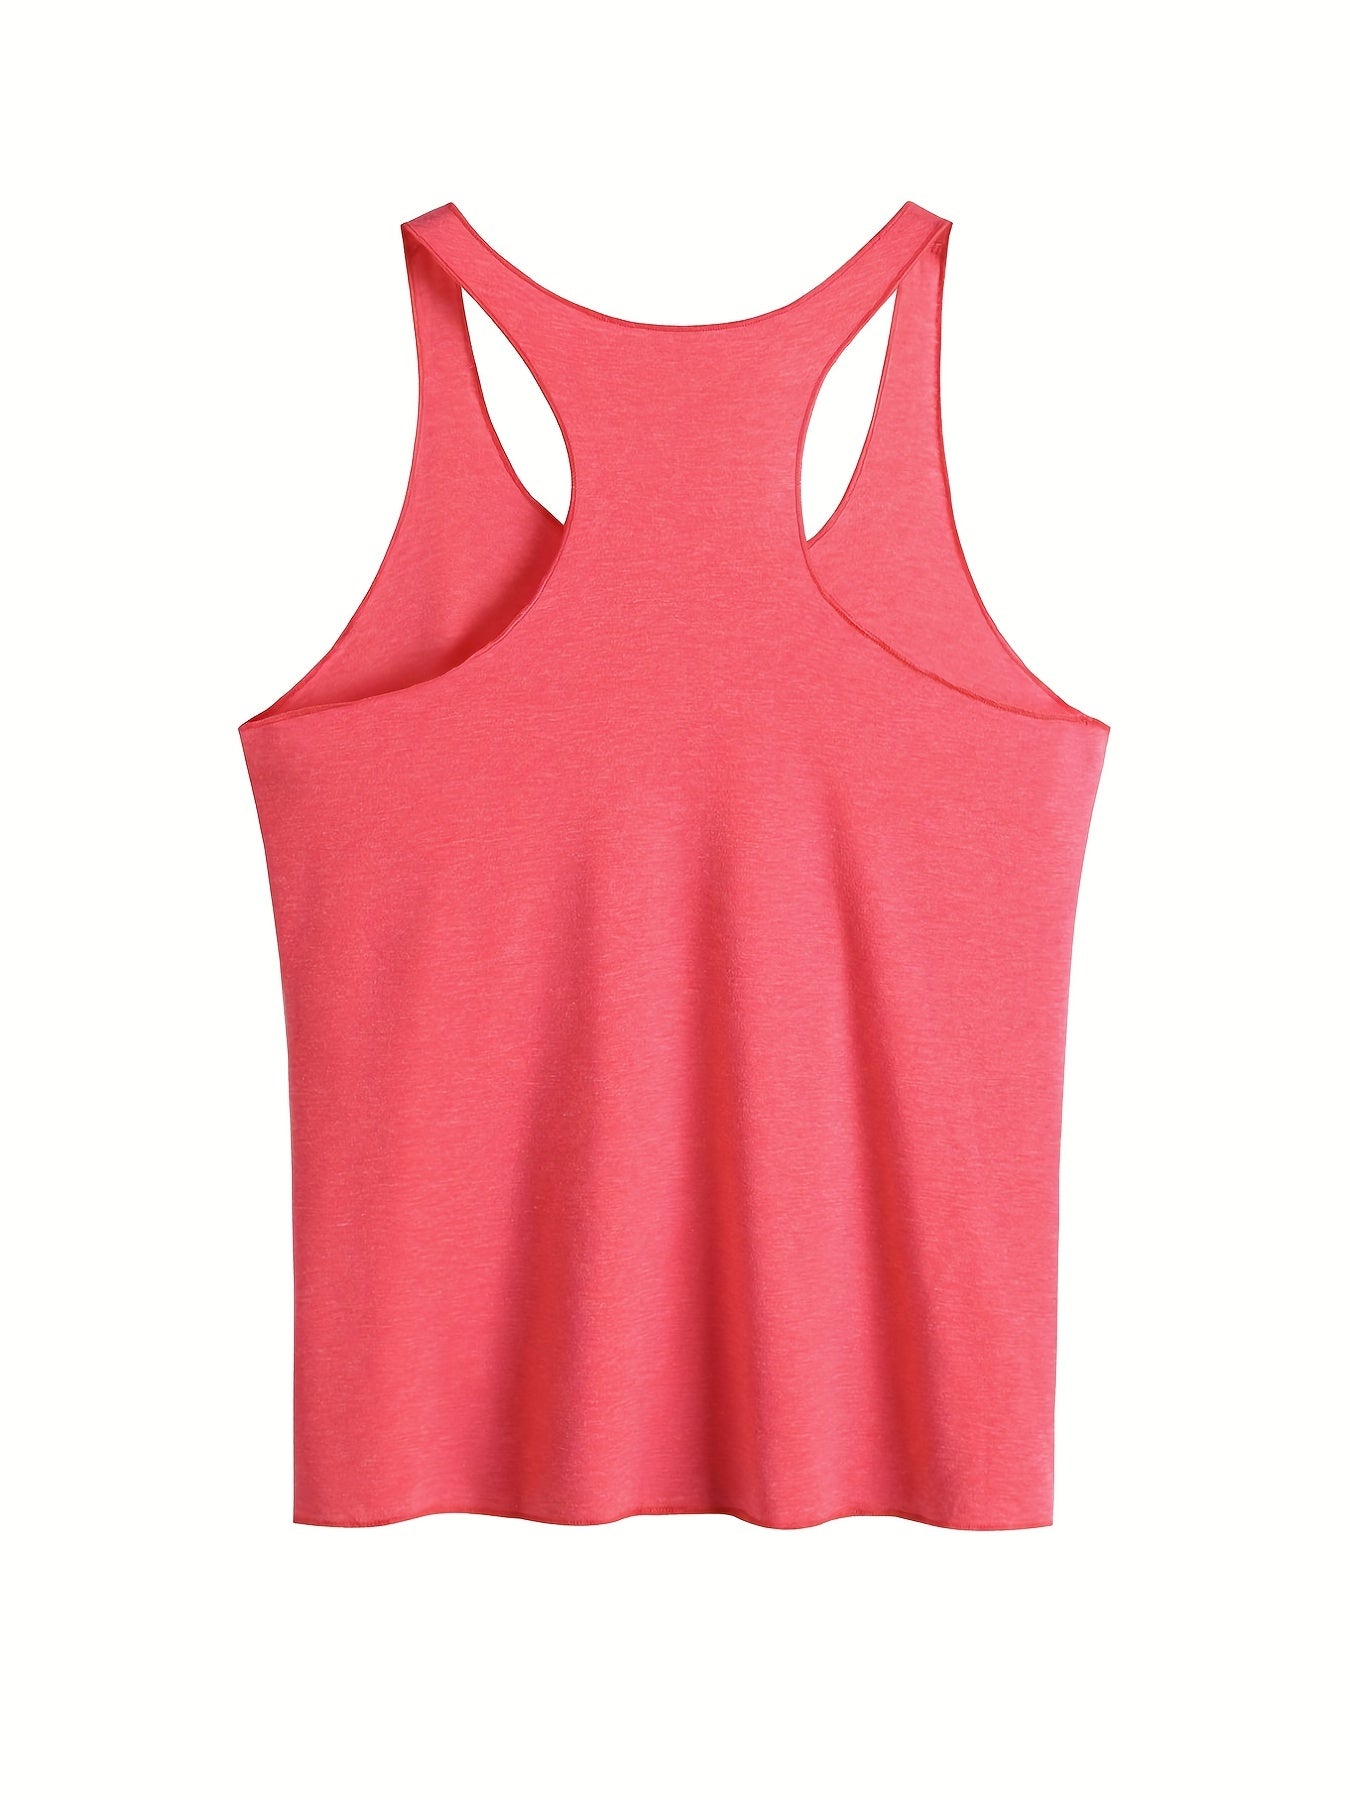 Letter Print Tank Top For Women, Fashionable Sleeveless Racer Back Sports Casual Top